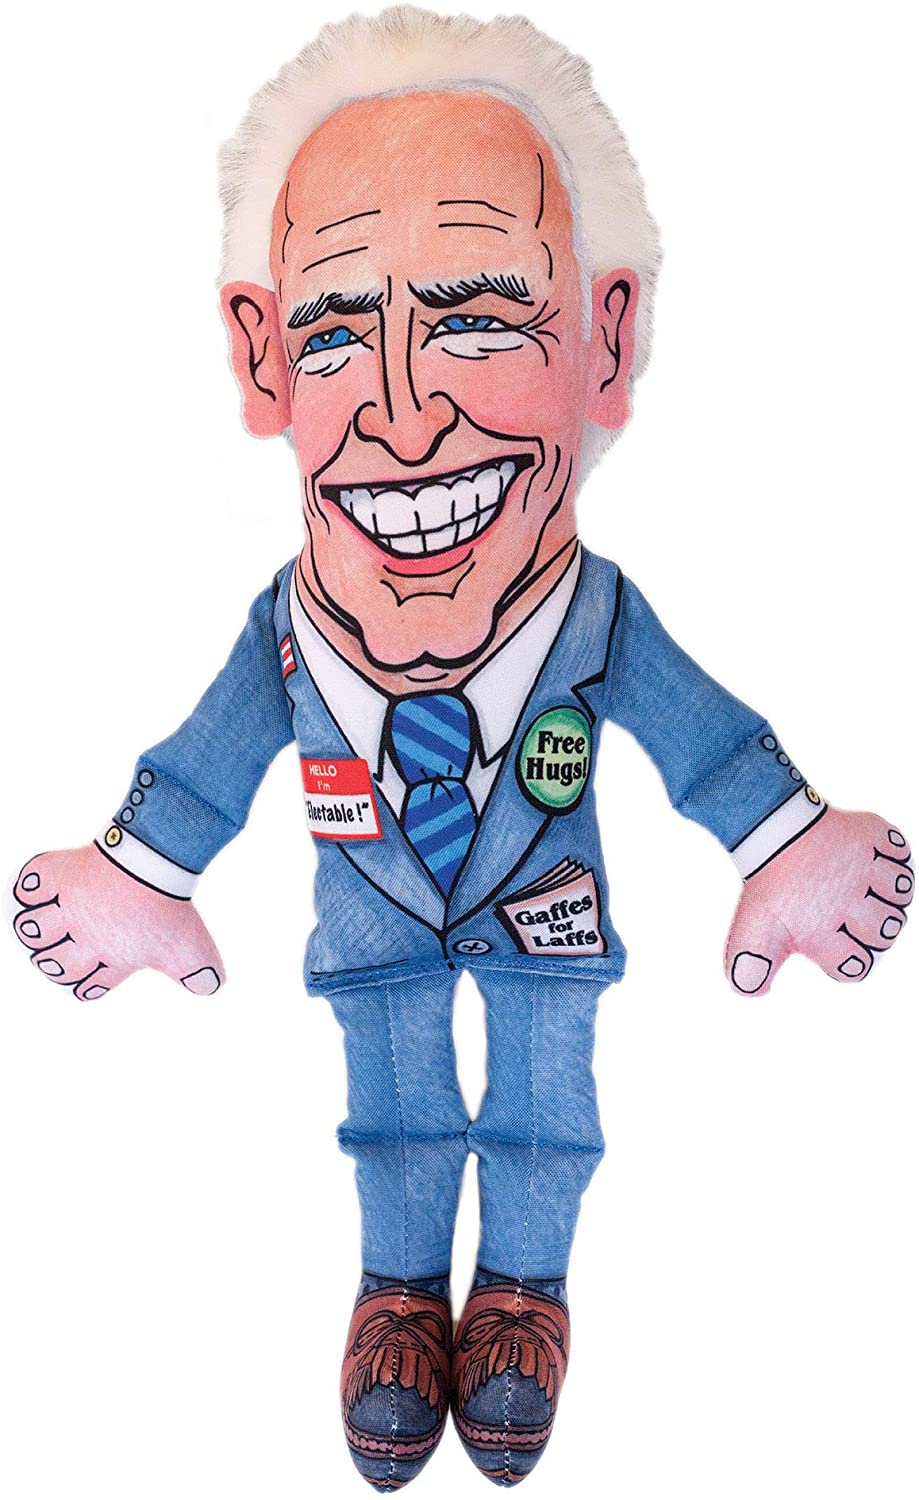 FUZZU Joe Biden Political Parody Dog Chew Toy with Squeaker - Durable Quality with Plush Accents, Fun & Entertaining Novelty Gift, Hand Illustrated Design